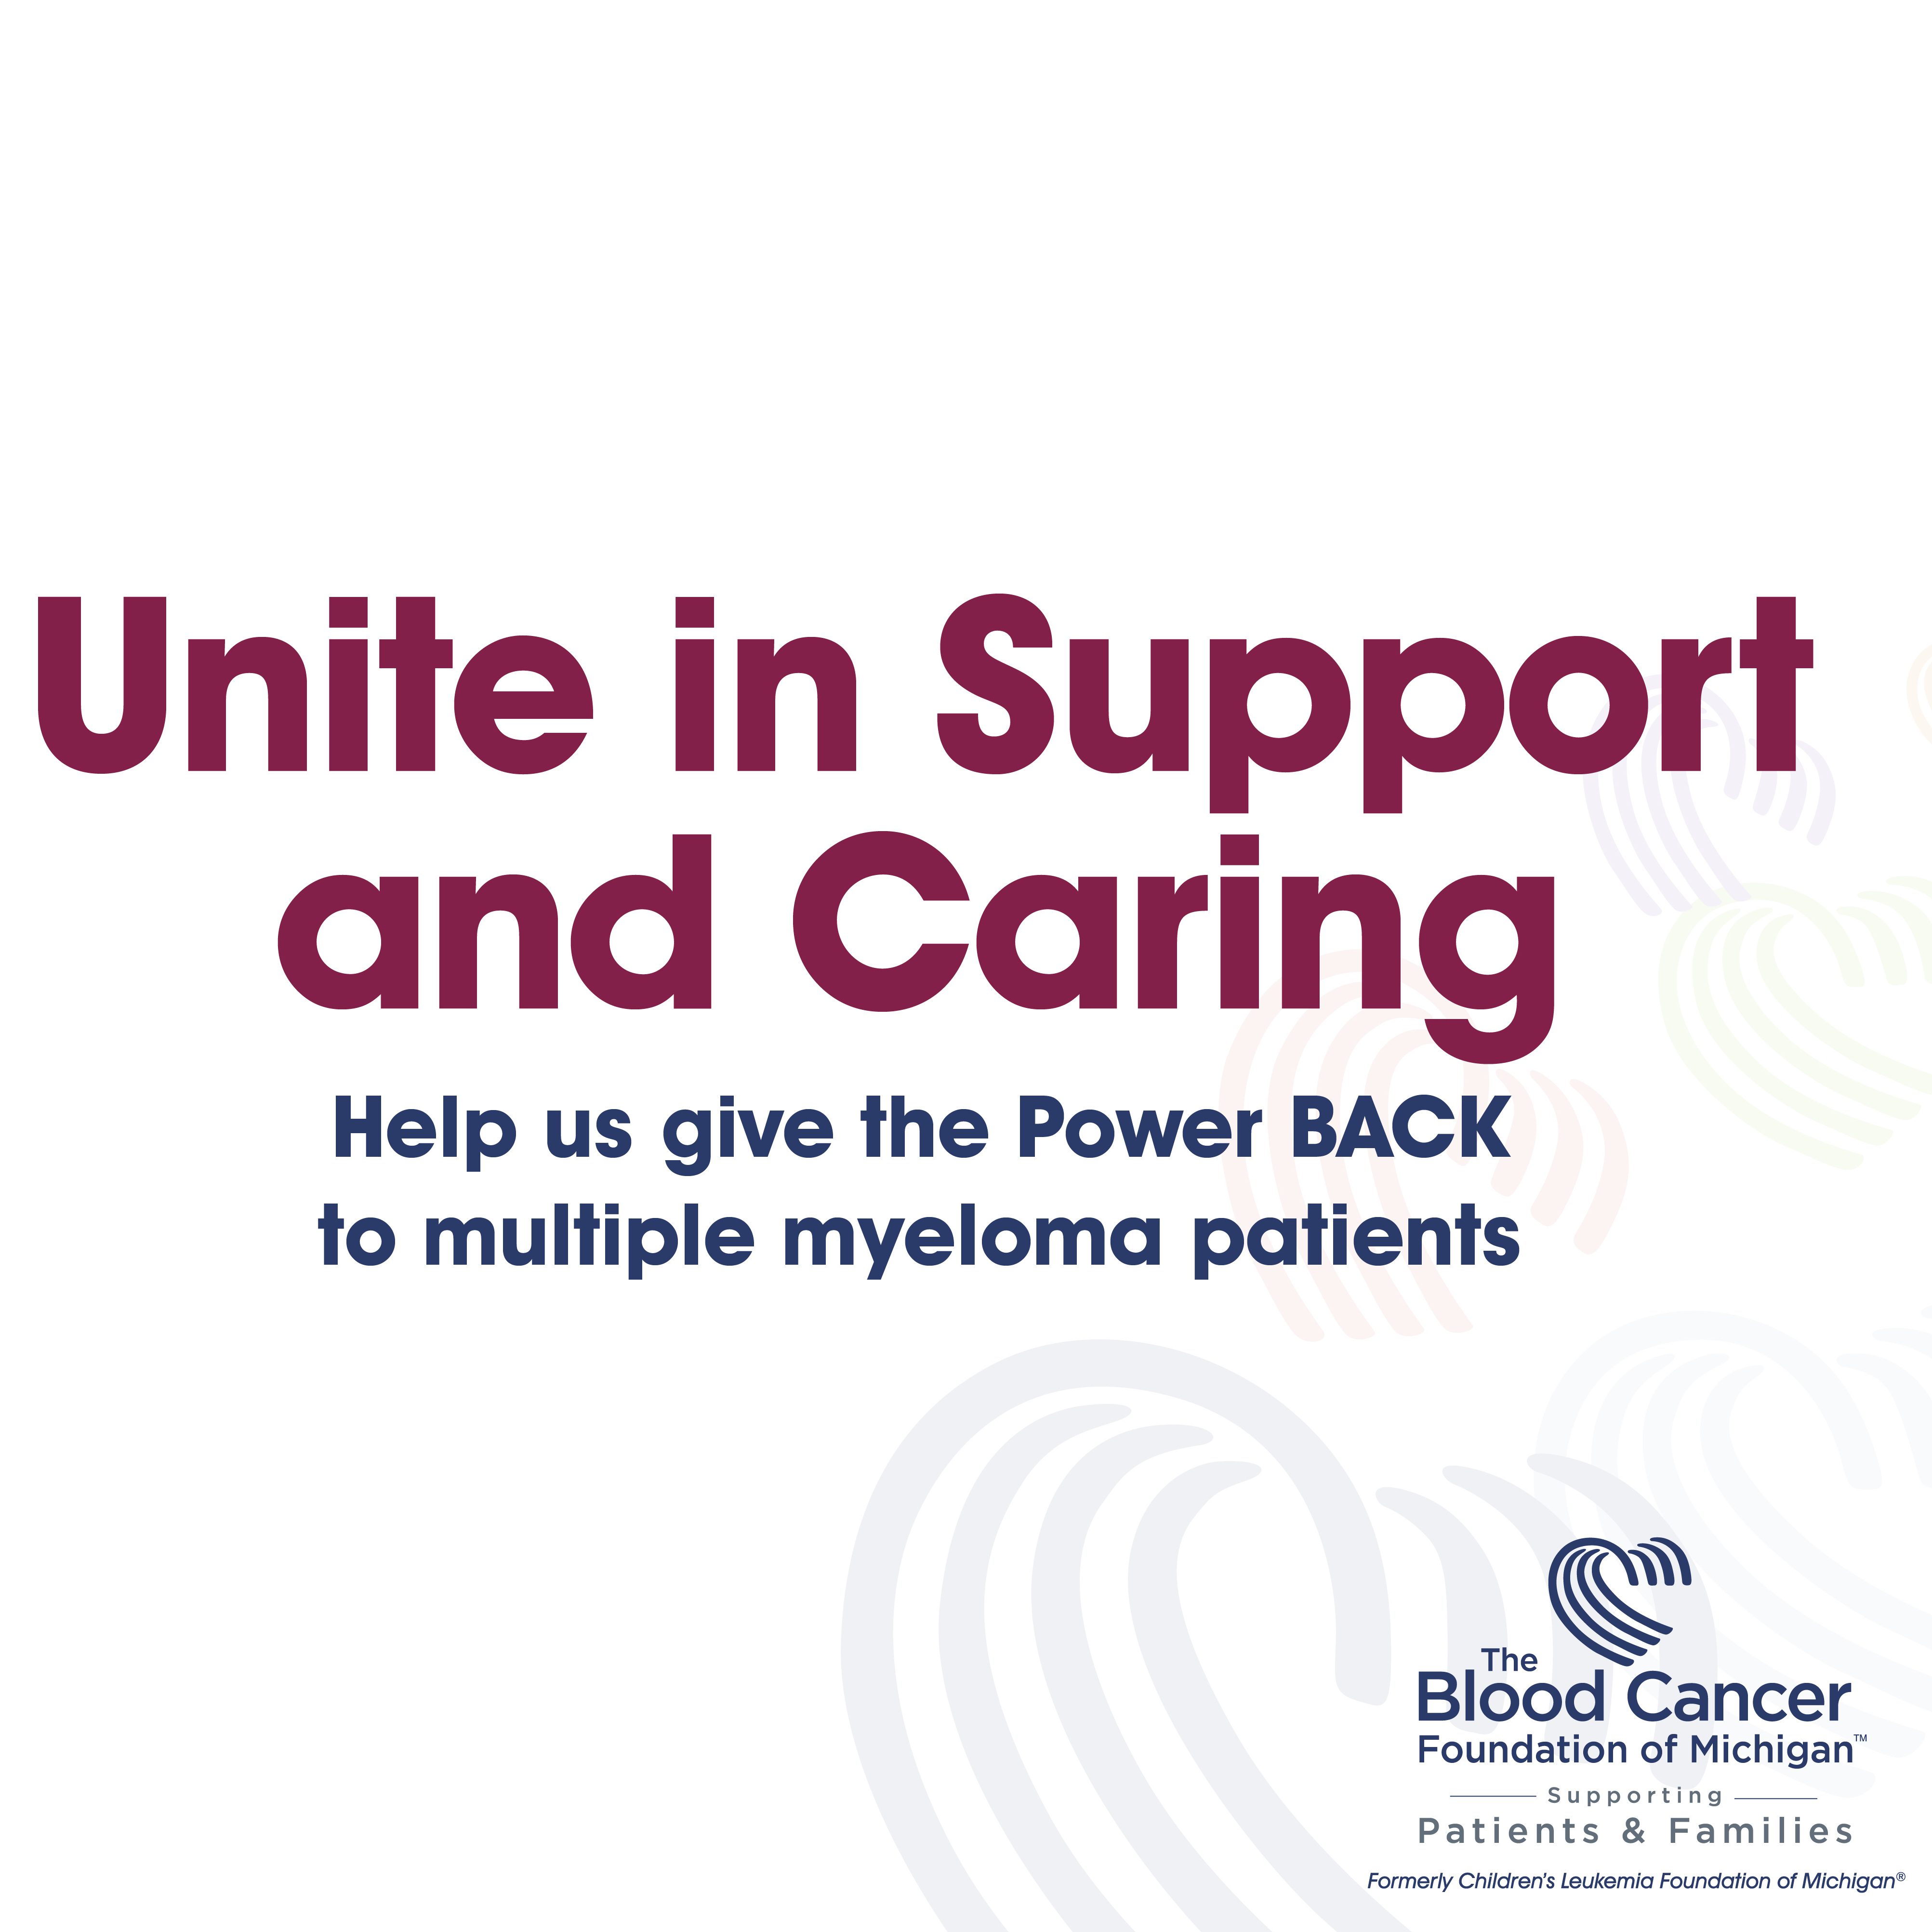  The Blood Cancer Foundation of Michigan  Launches Campaign To Support Patients During  Multiple Myeloma Awareness Month